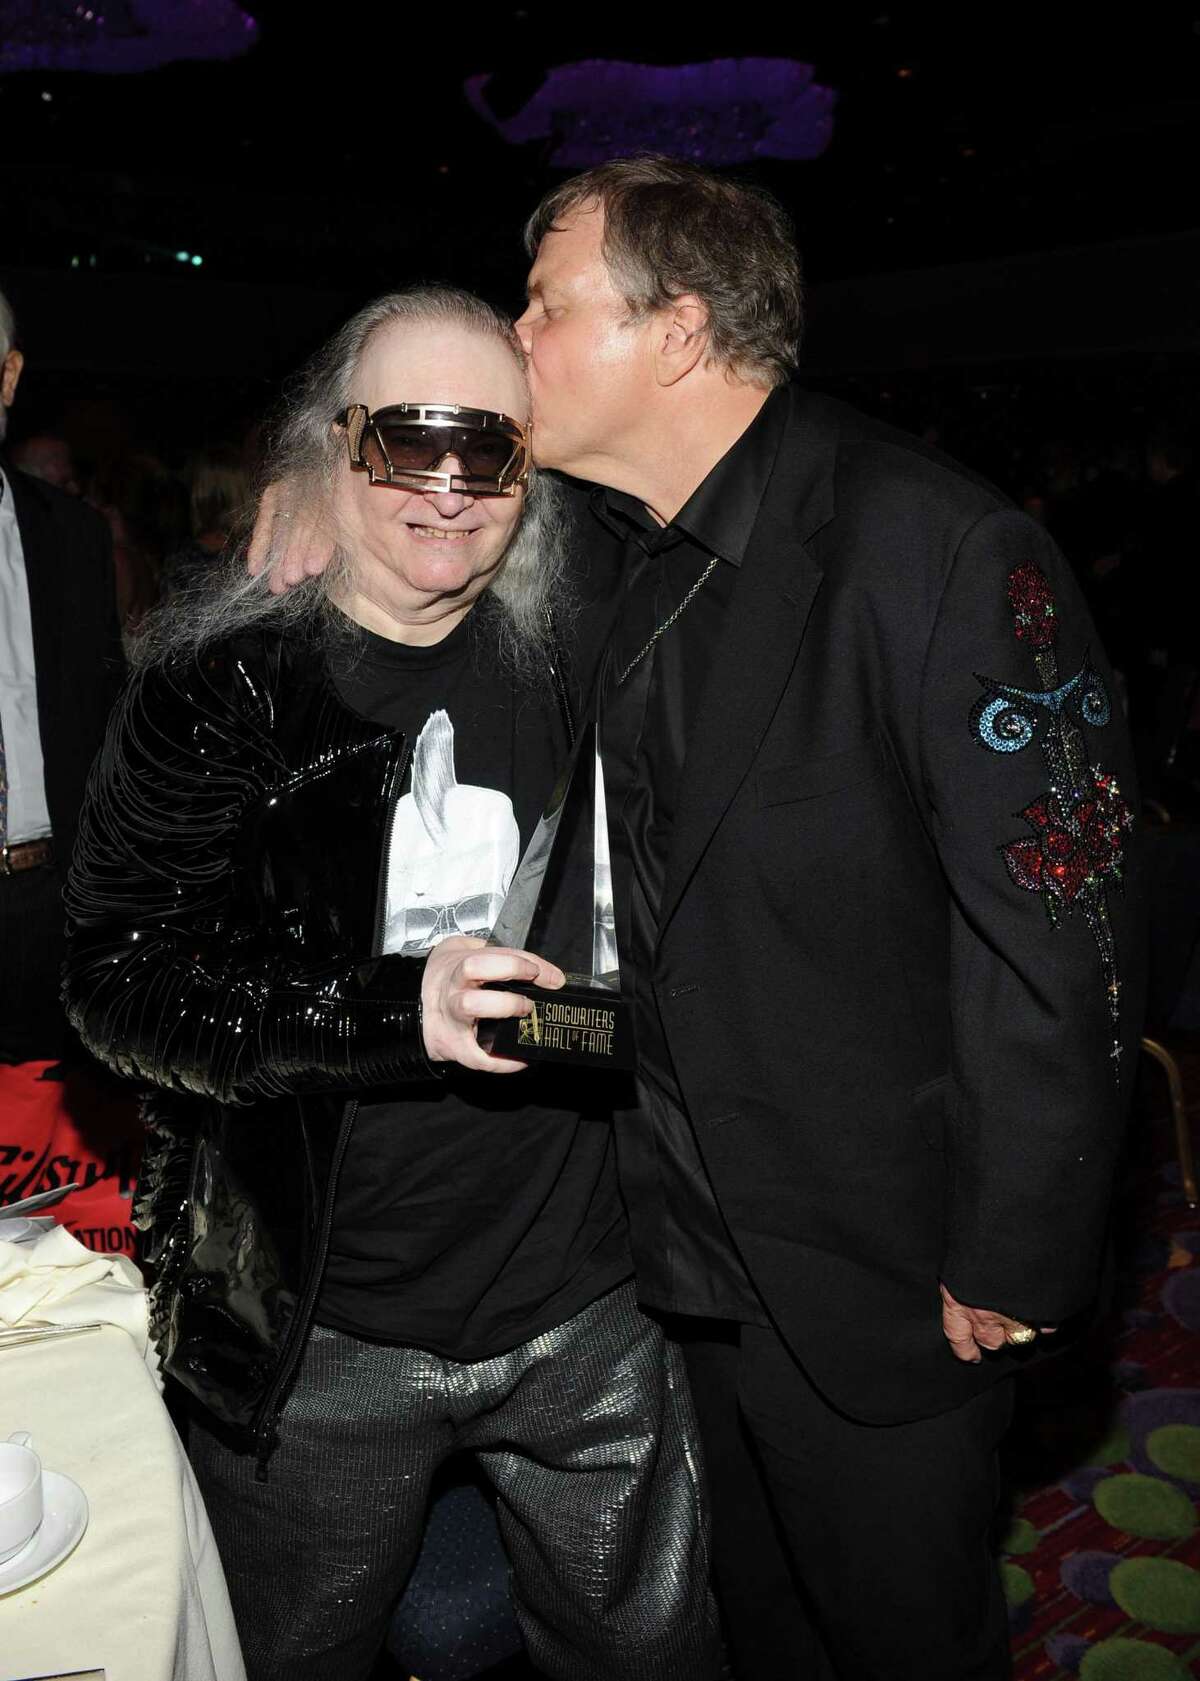 FILE - APRIL 20: Songwriter Jim Steinman has died at 73 years old. Steinman wrote songs for Meatloaf, Celine Dion, Barbra Streisand and Def Leppard. NEW YORK, NY - JUNE 14: Jim Steinman and Meat Loaf attend at the Songwriters Hall of Fame 43rd Annual induction and awards at The New York Marriott Marquis on June 14, 2012 in New York City. (Photo by Larry Busacca/Getty Images for Songwriters Hall Of Fame)